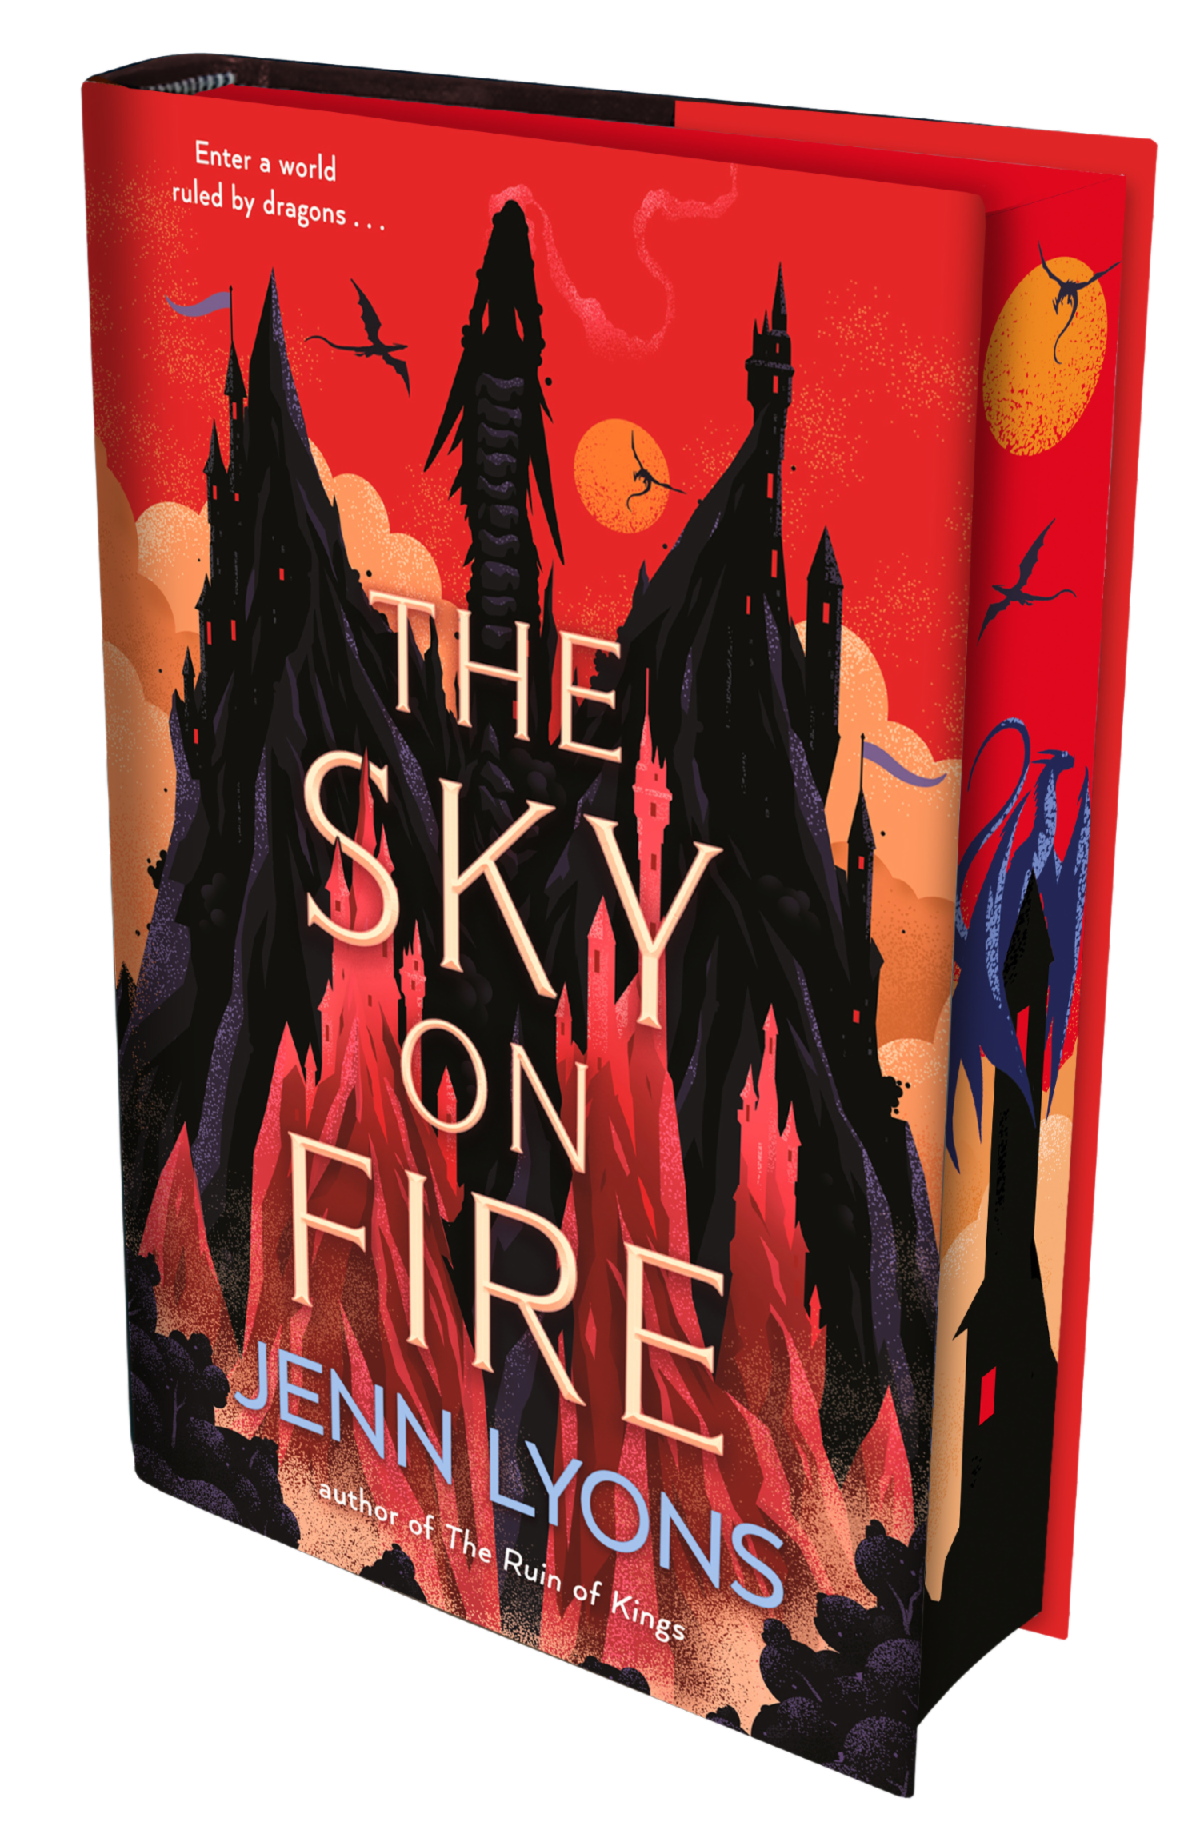 Cover of The Sky on Fire